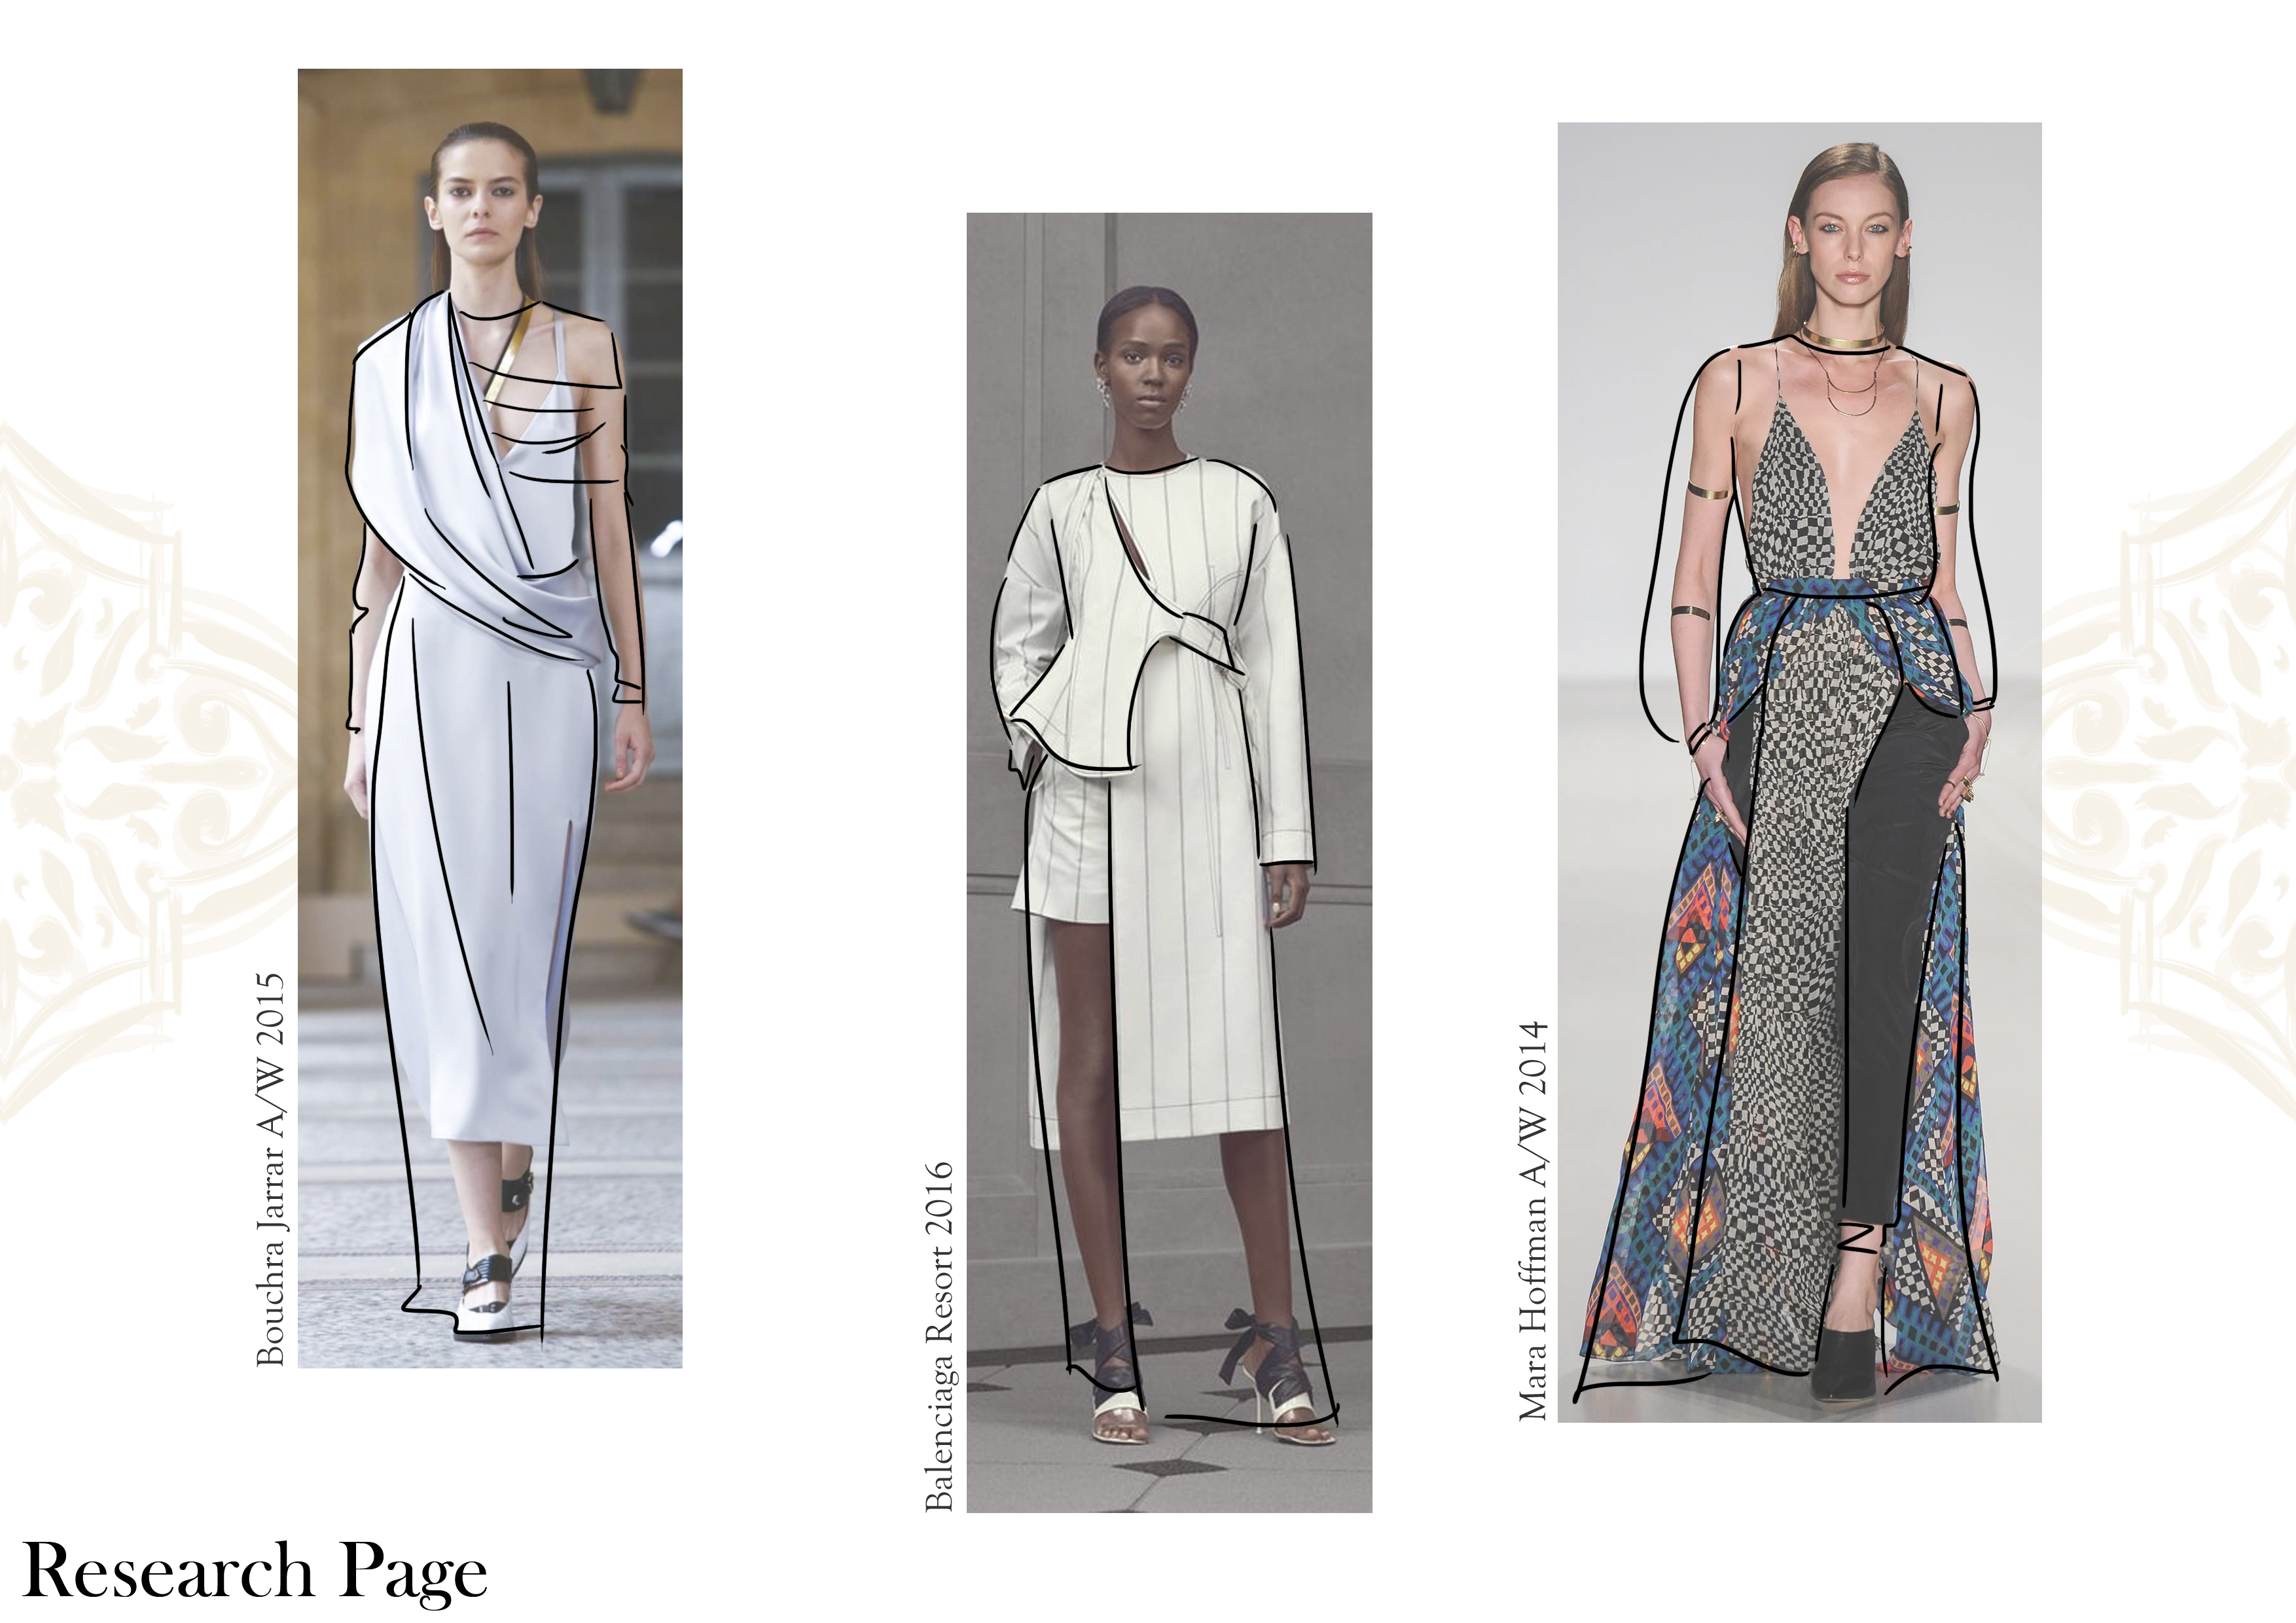 Bouchra Jarrar A/W 2015

 

&lt;1

p—

oO

ol

© &lt;

oO a

ol &lt;

- £

¢ =

= ~~

g Ss
co
=
=

 

Research Page